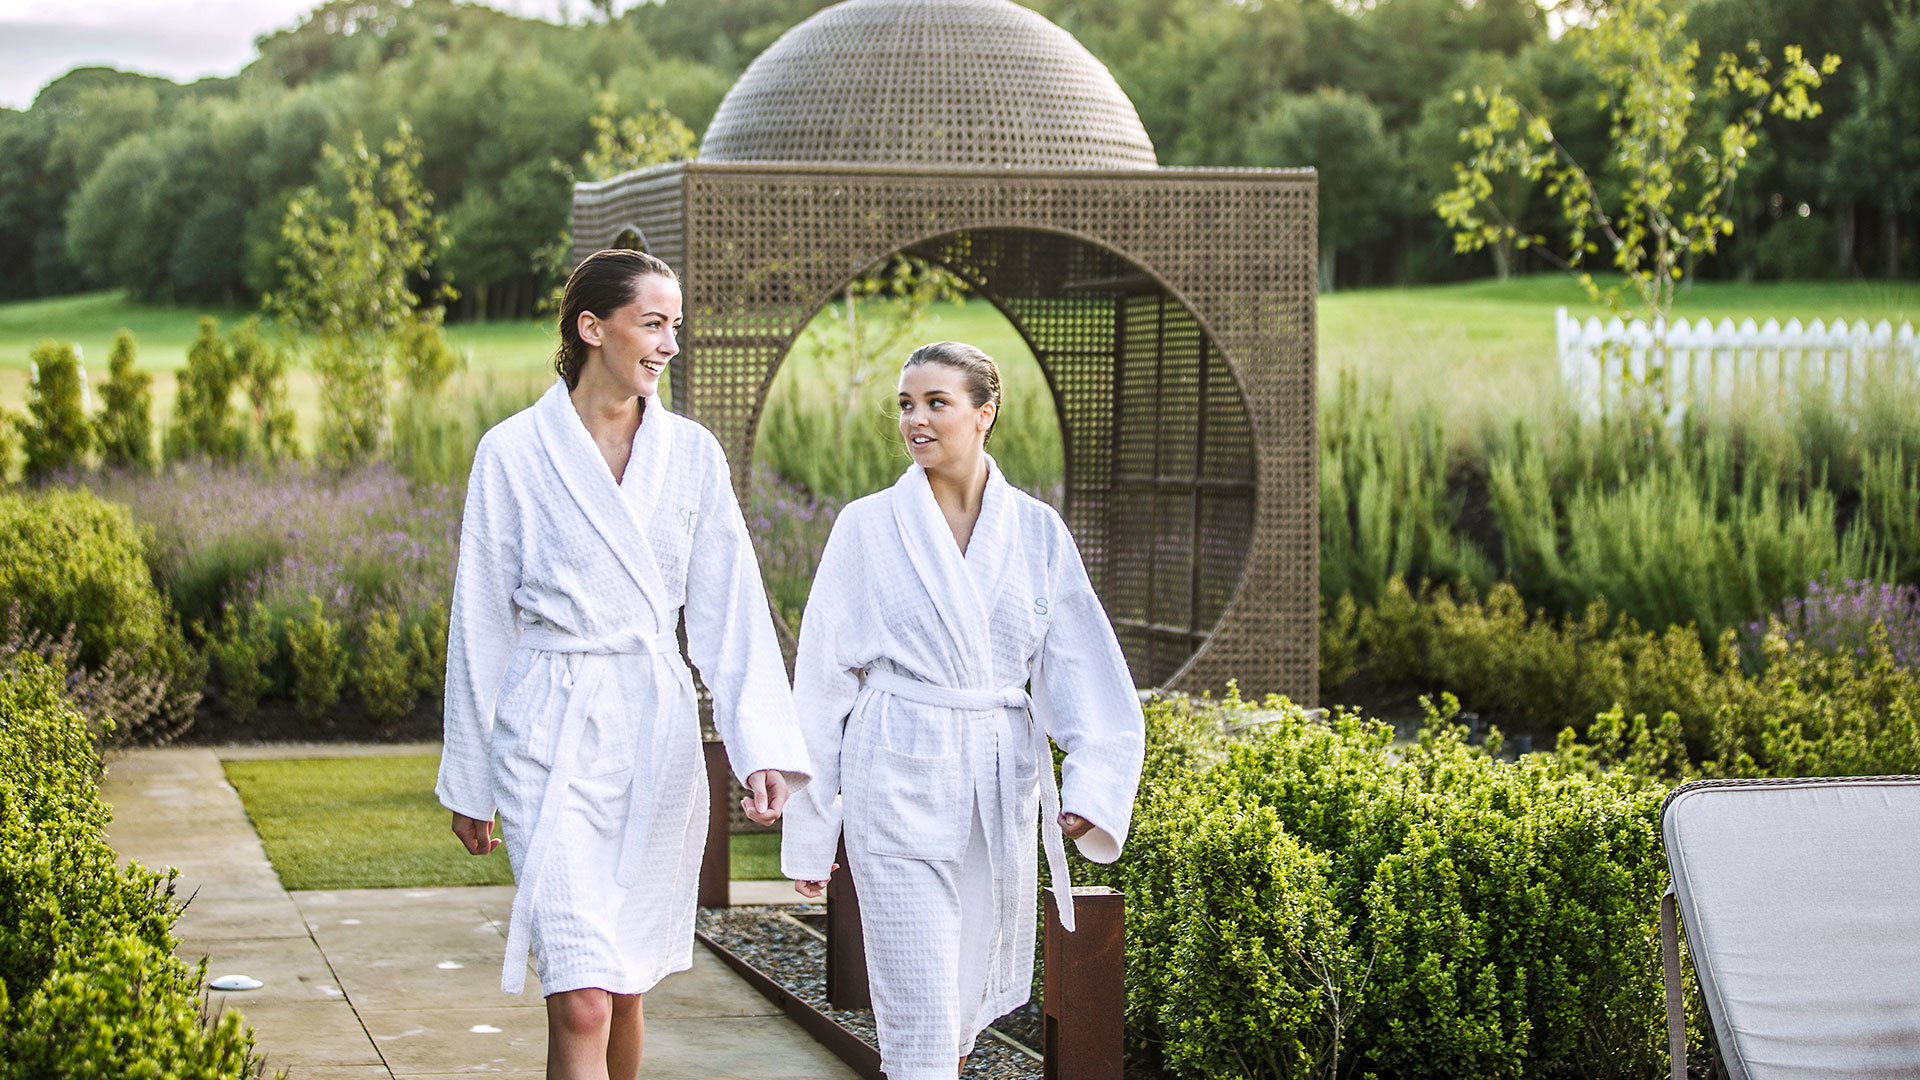 Guests in robes enjoying the Spa Garden - Ramside Hall Hotel, Durham